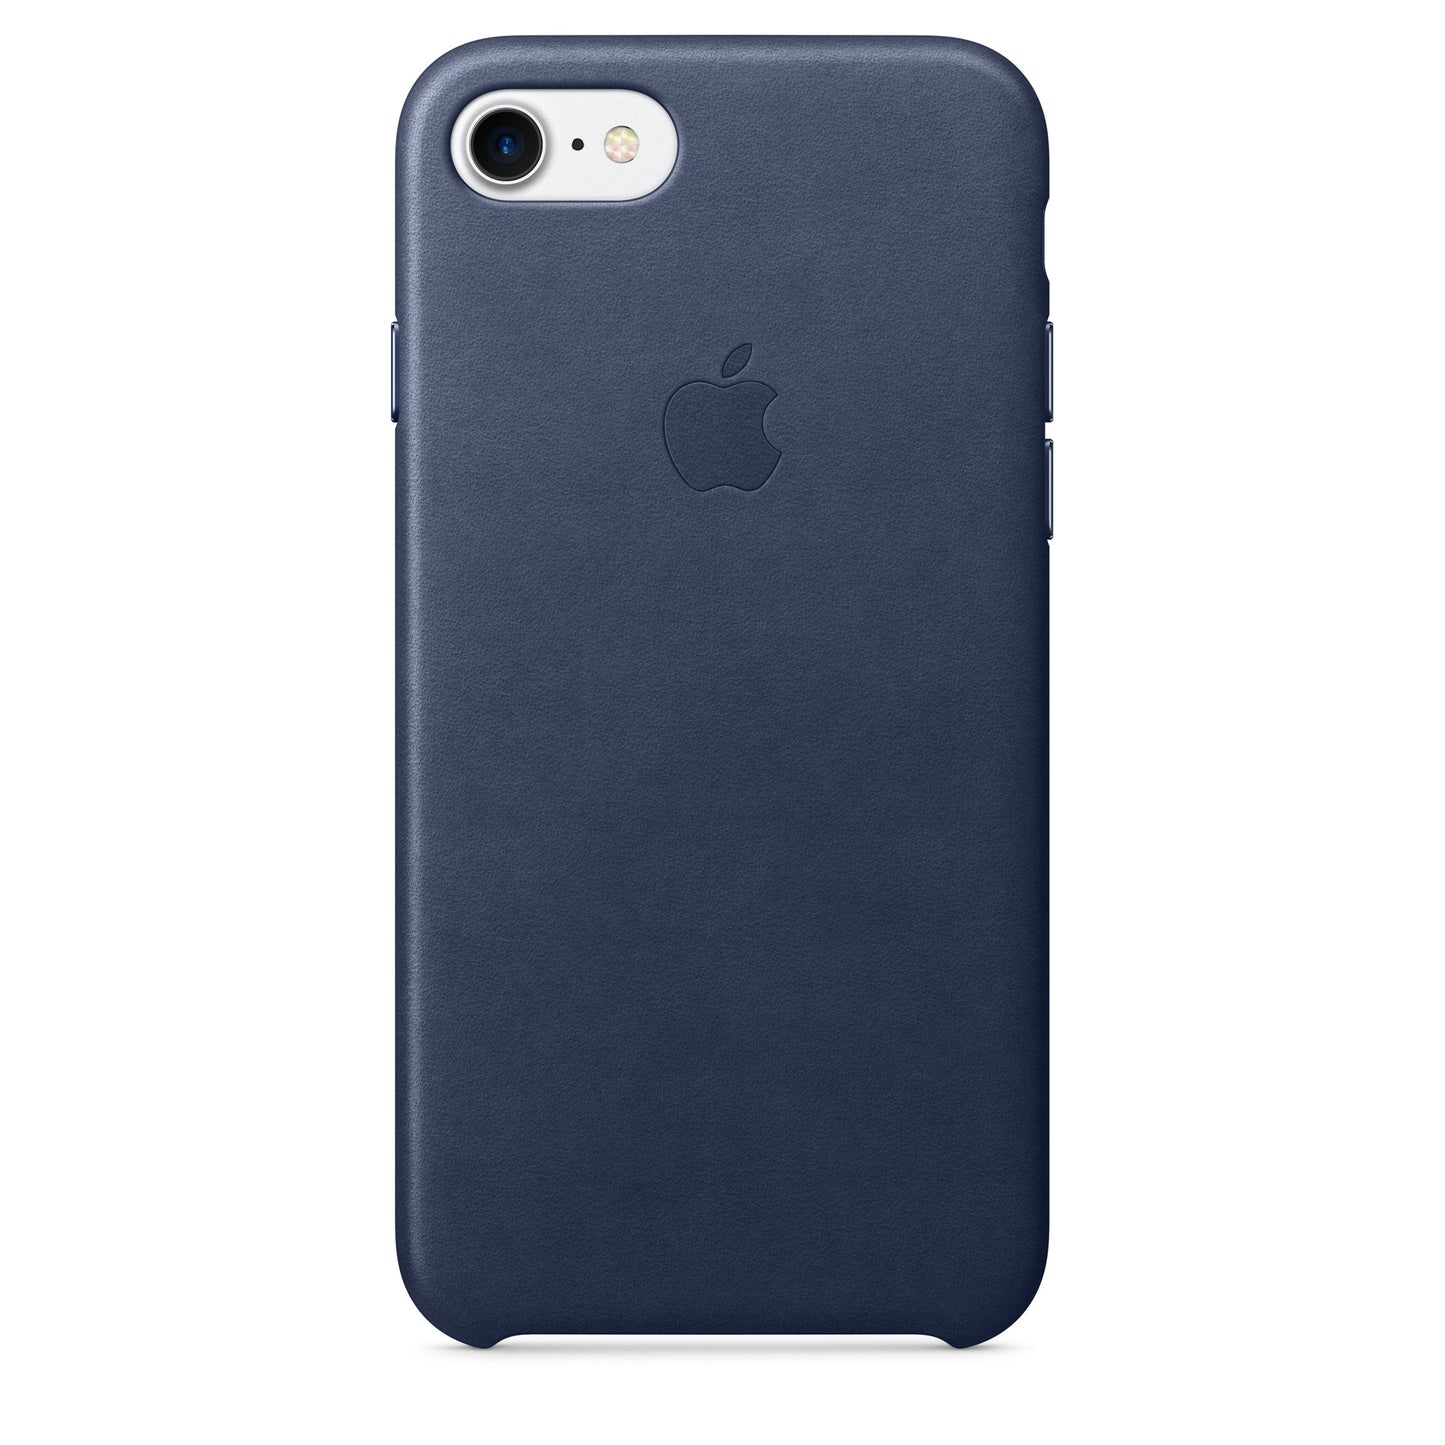 (Open Box) Apple iPhone 7 Leather Case - Midnight Blue